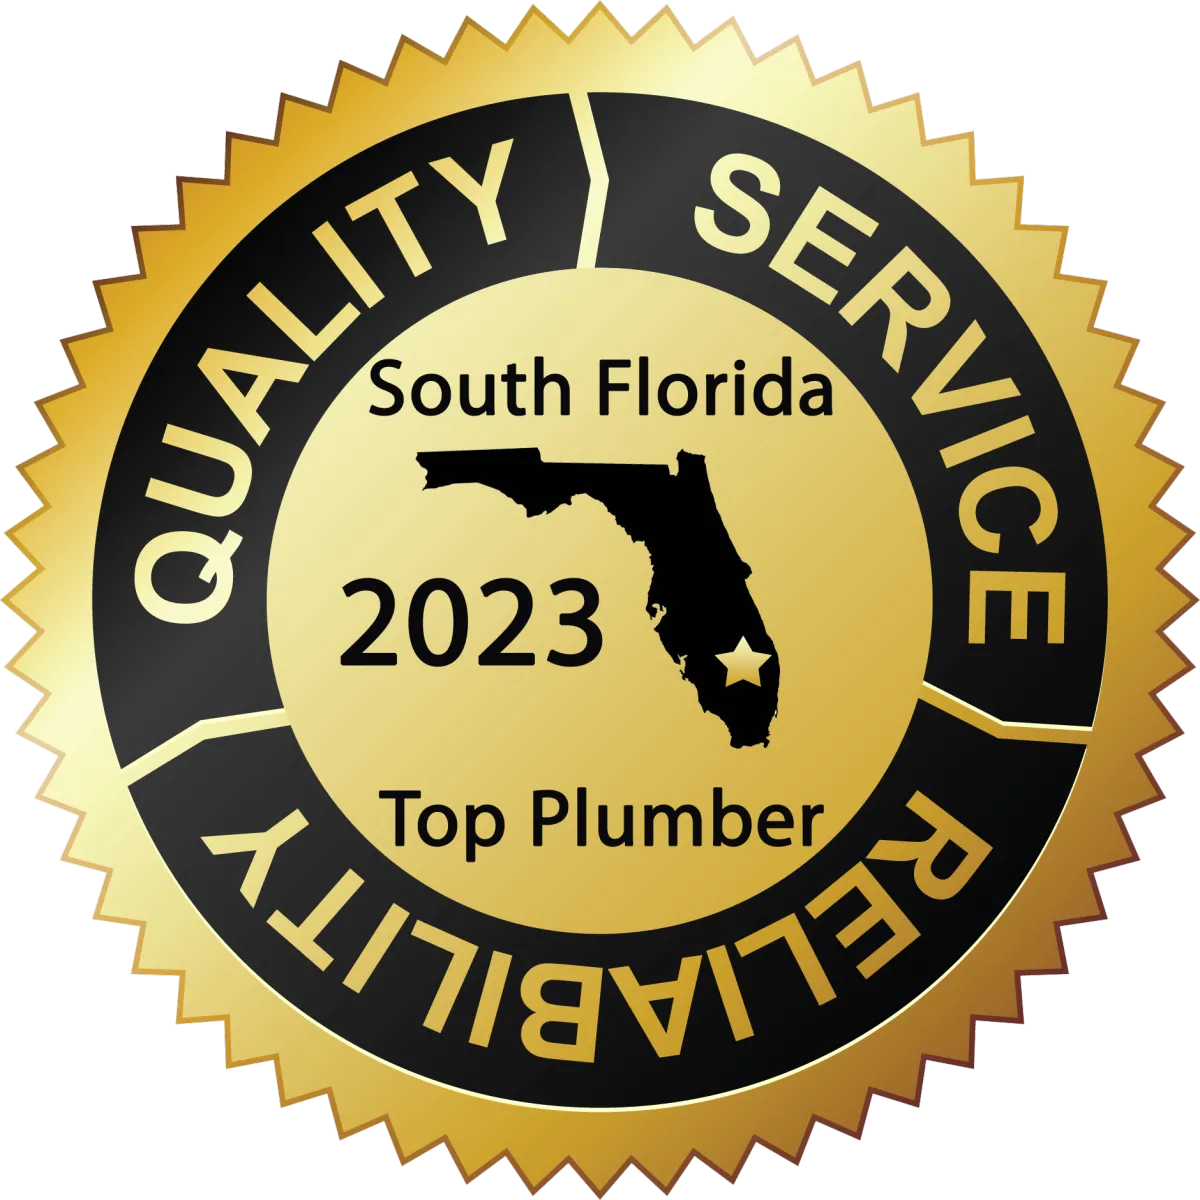 South Florida Best Commercial Plumbing Company West Palm Beach